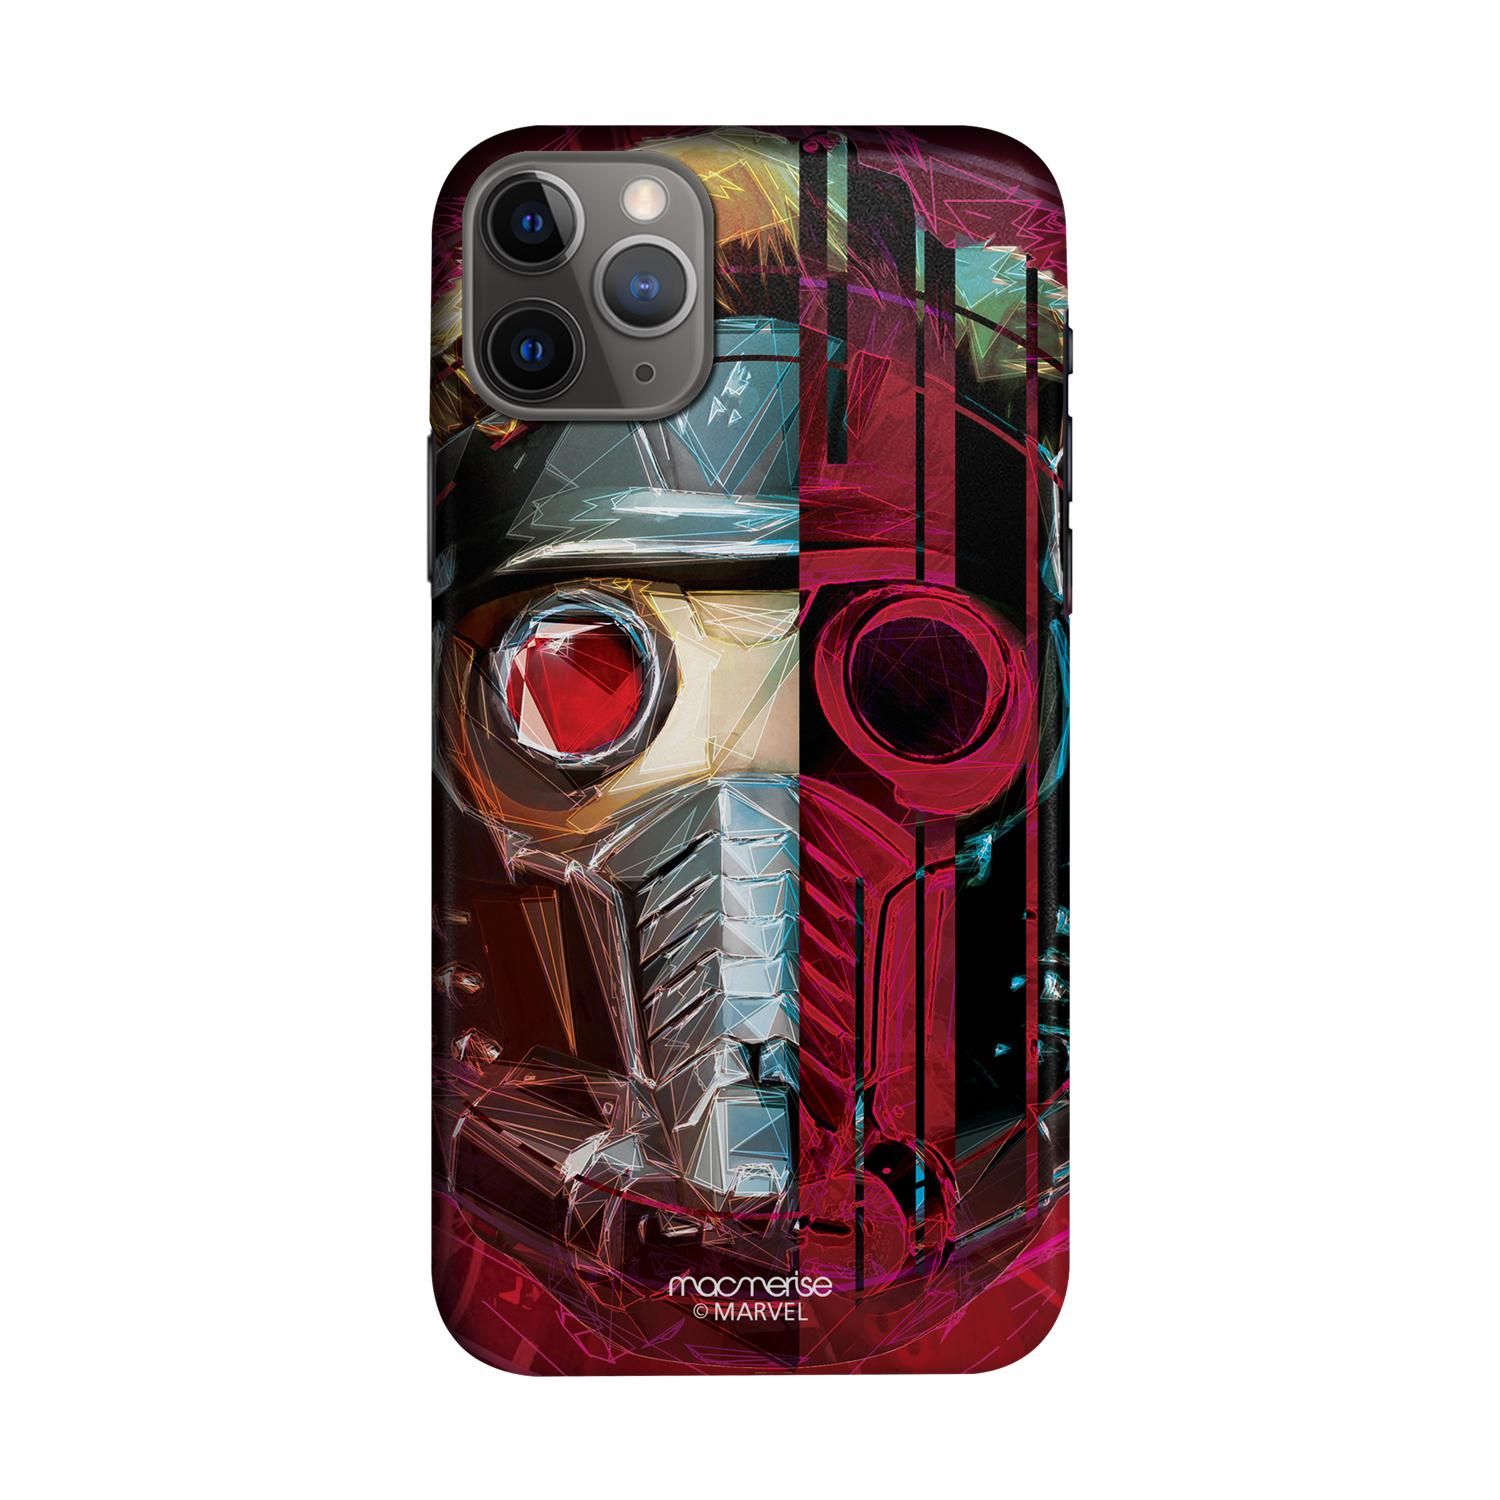 Buy Grunge Suit StarLord - Sleek Phone Case for iPhone 11 Pro Max Online